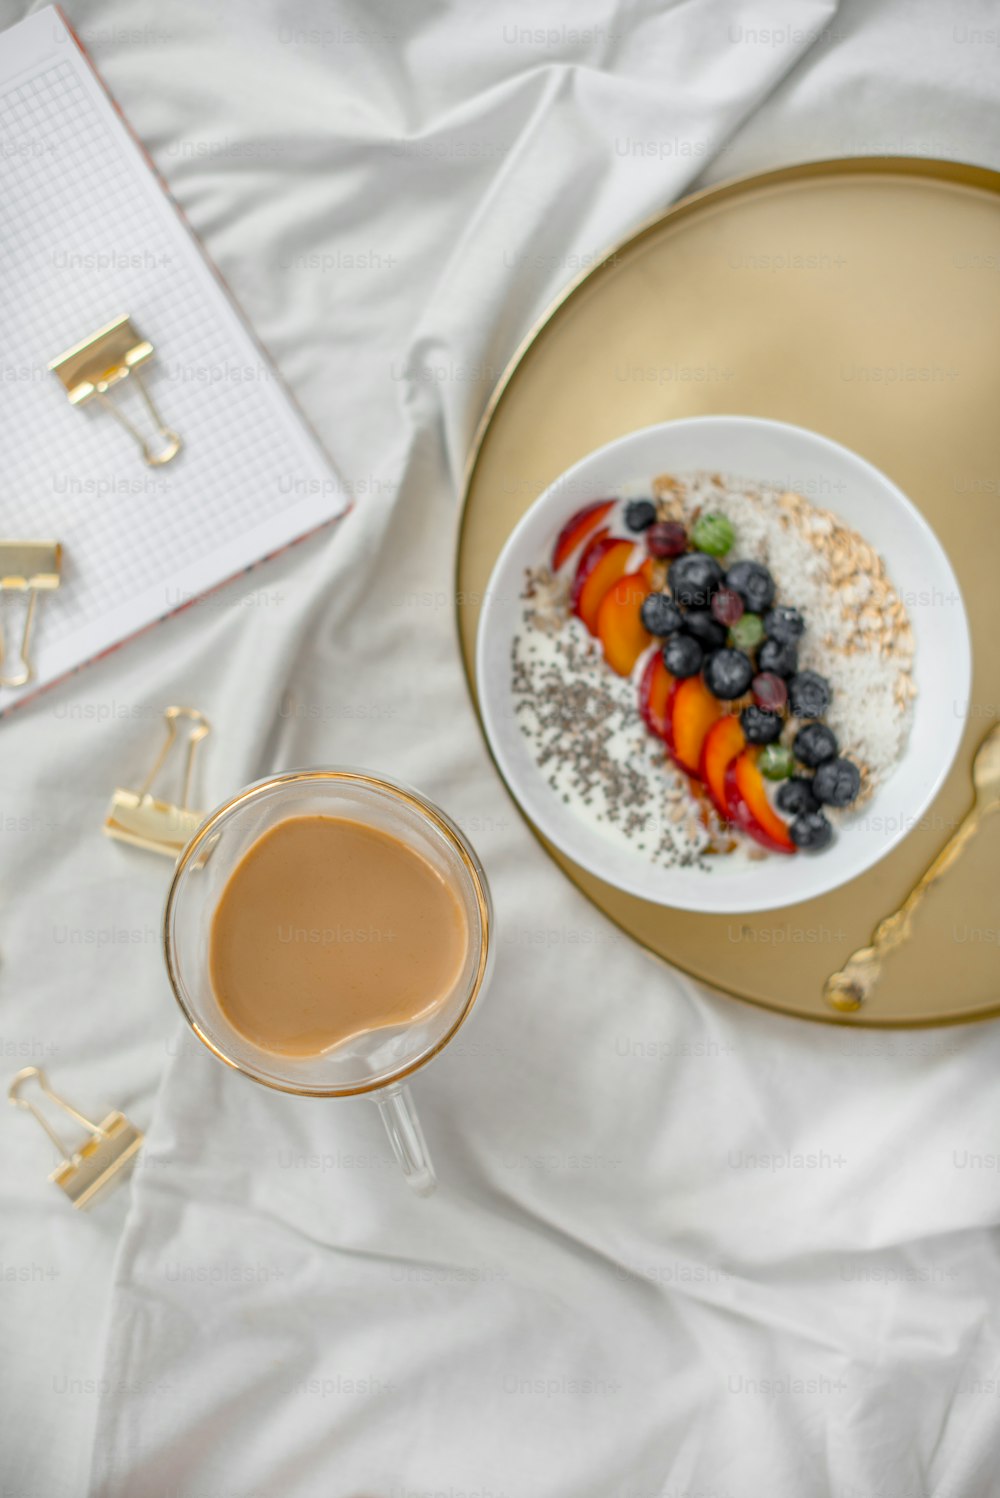 a plate of food and a cup of coffee on a bed